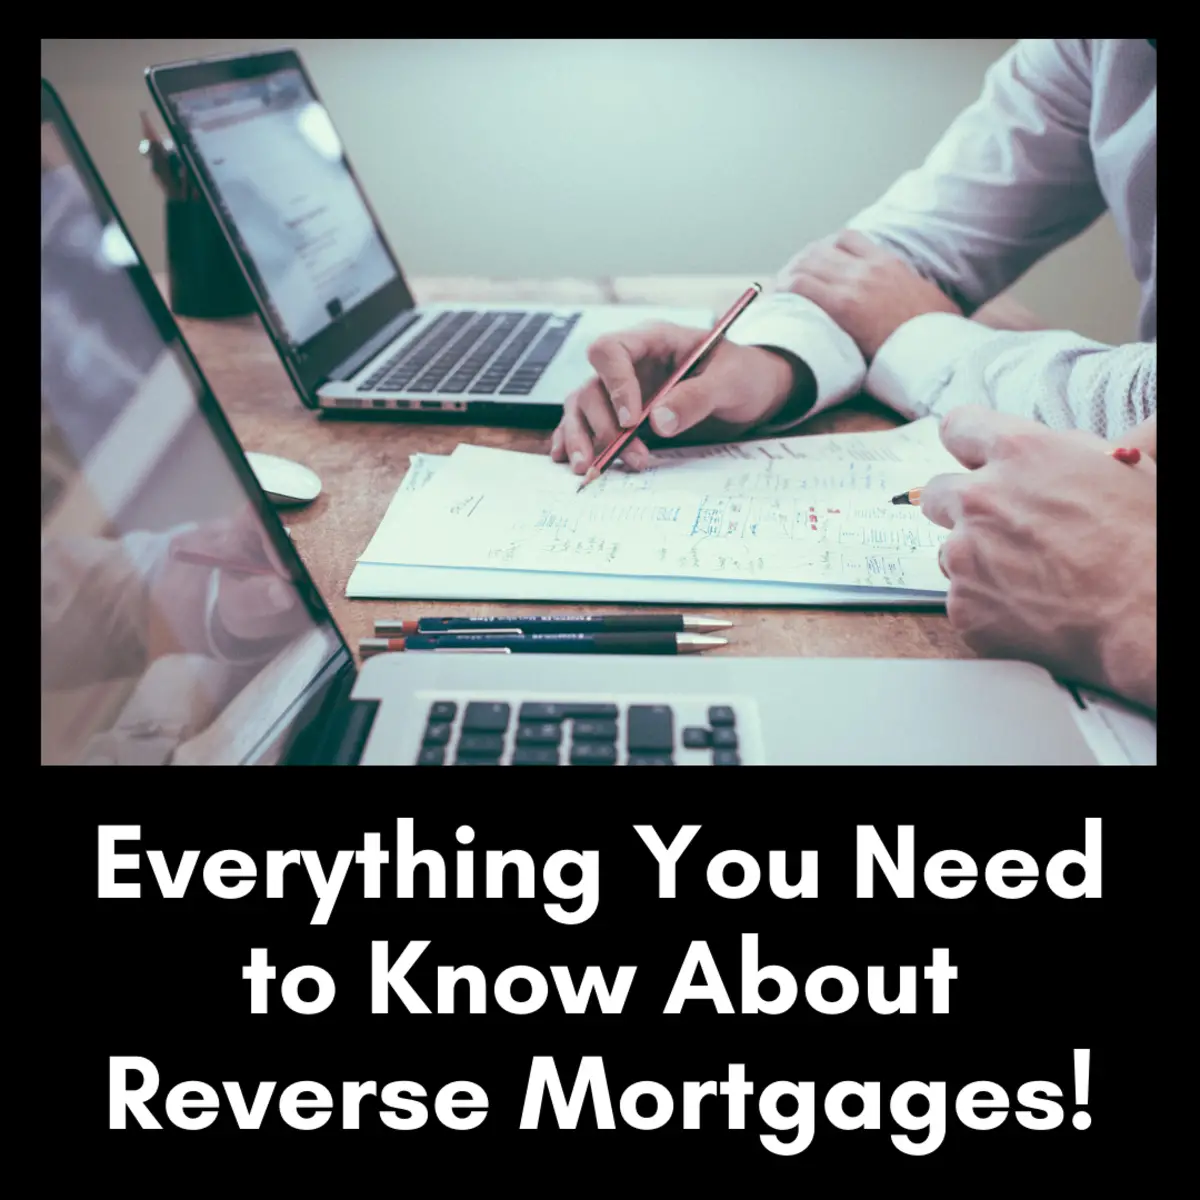 Is a Reverse Mortgage a Good Idea?